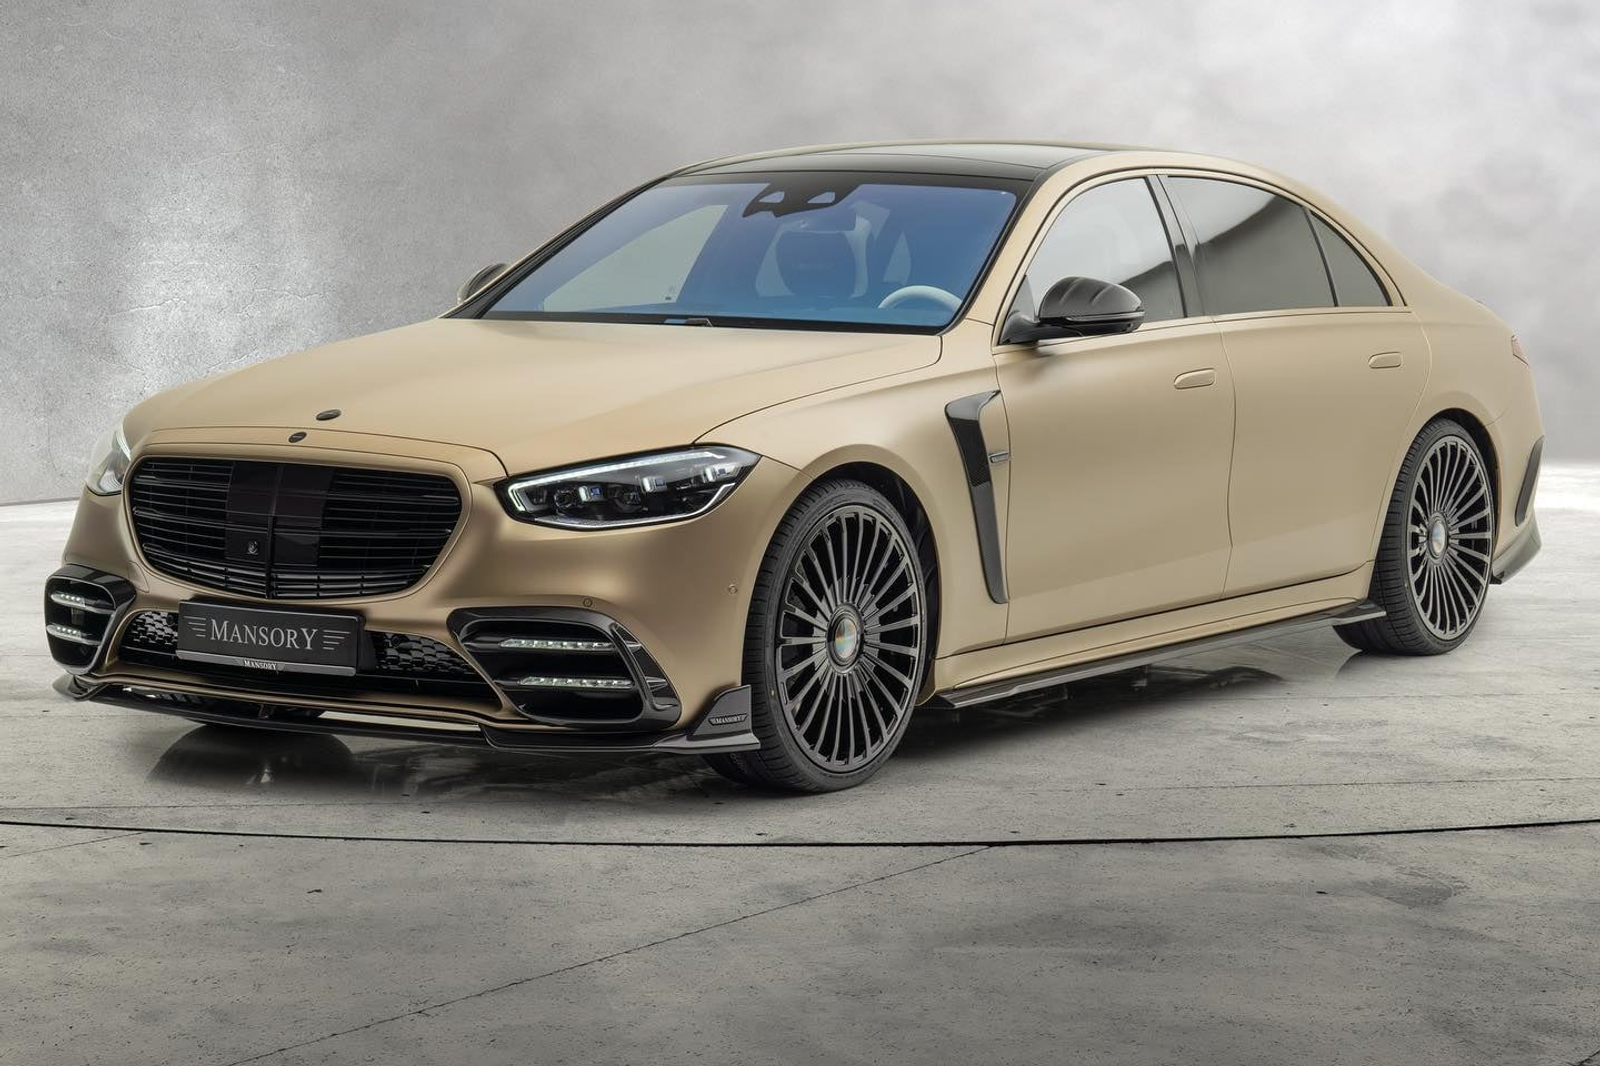 video, tuning, mercedes-benz s-class in kalahari gold doesn't look that bad